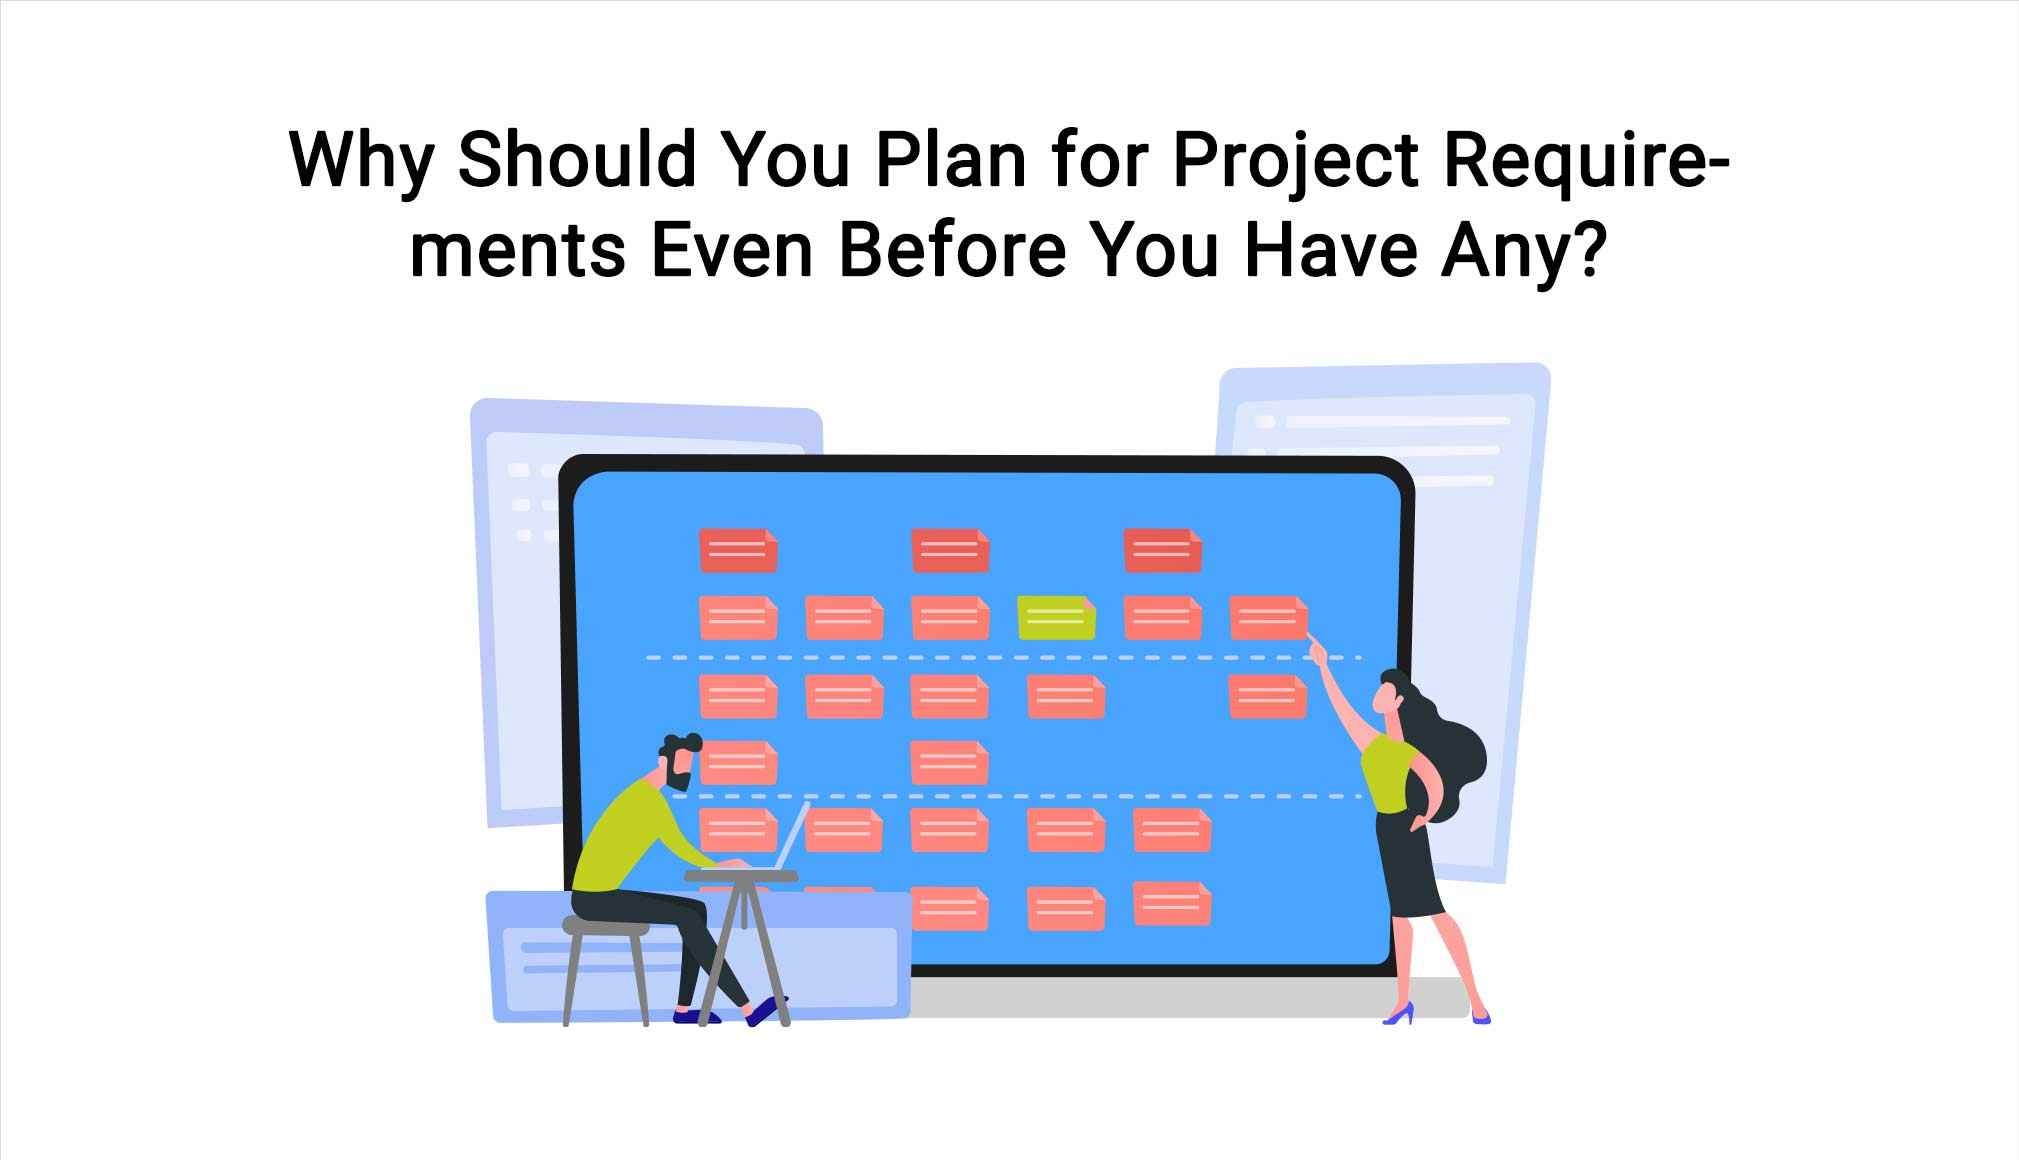 Why Should You Plan For Project Requirements Even Before You Have Any?